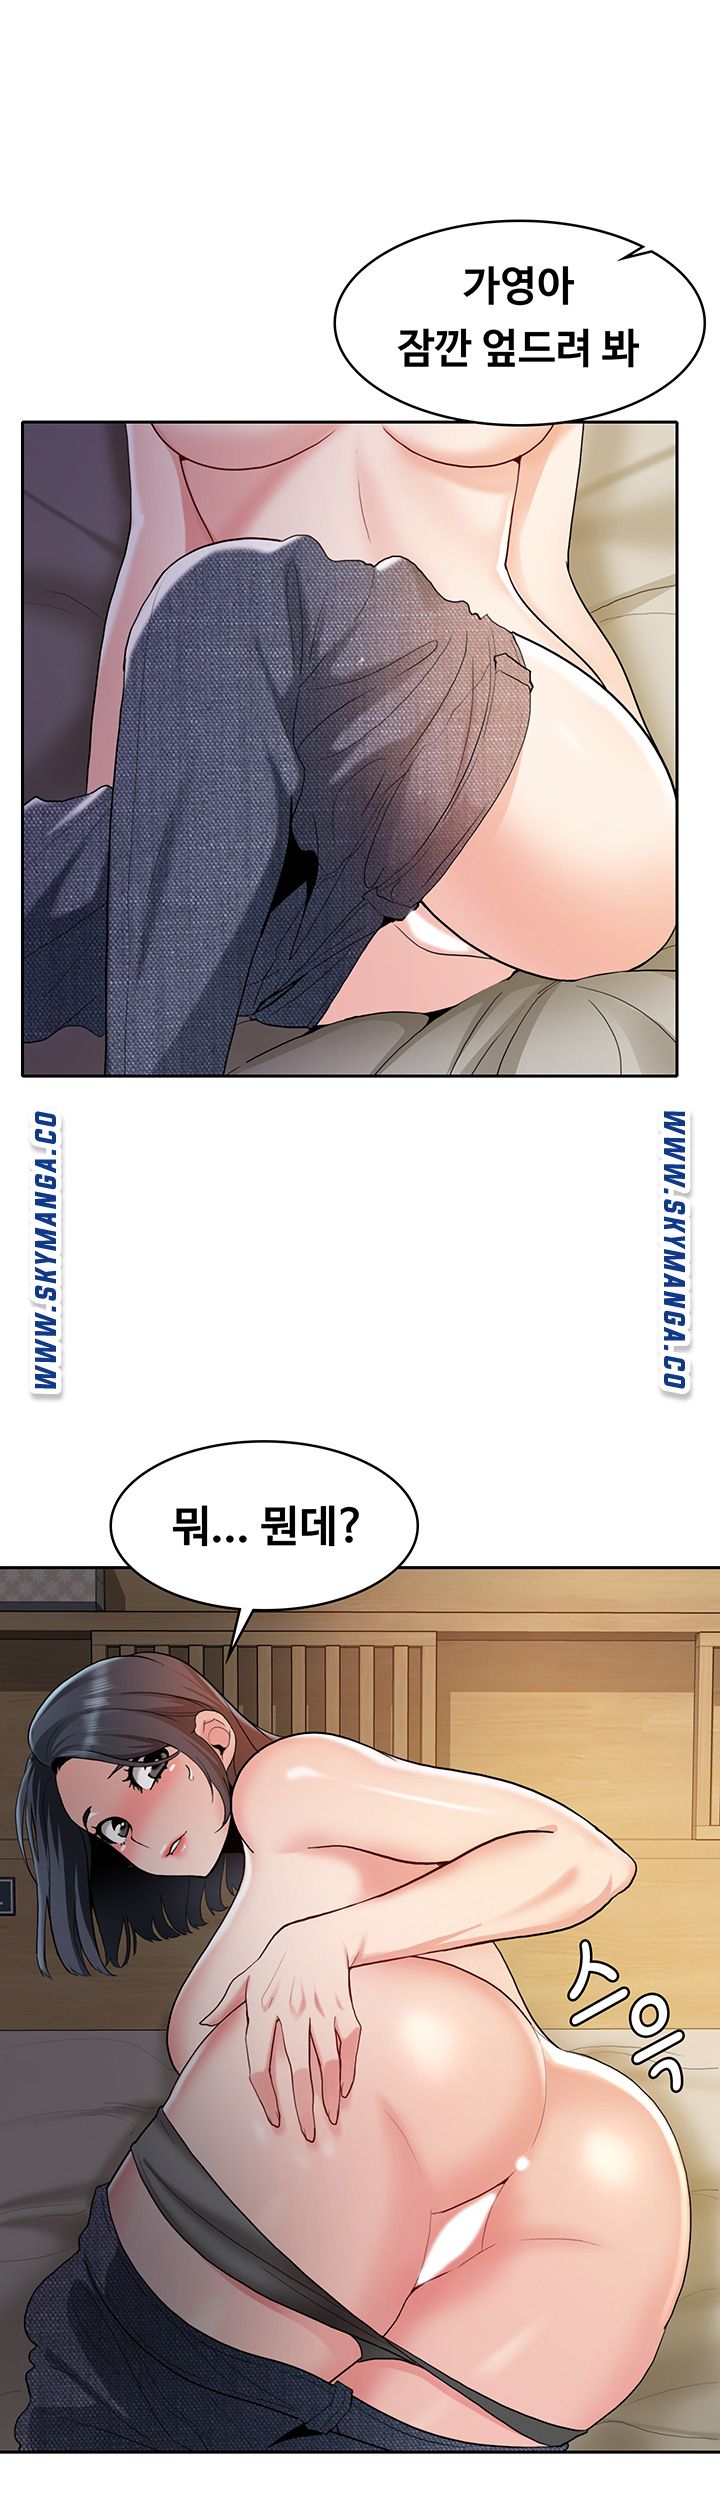 Wanna Service (Do You Want a Service?) Raw - Chapter 3 Page 13